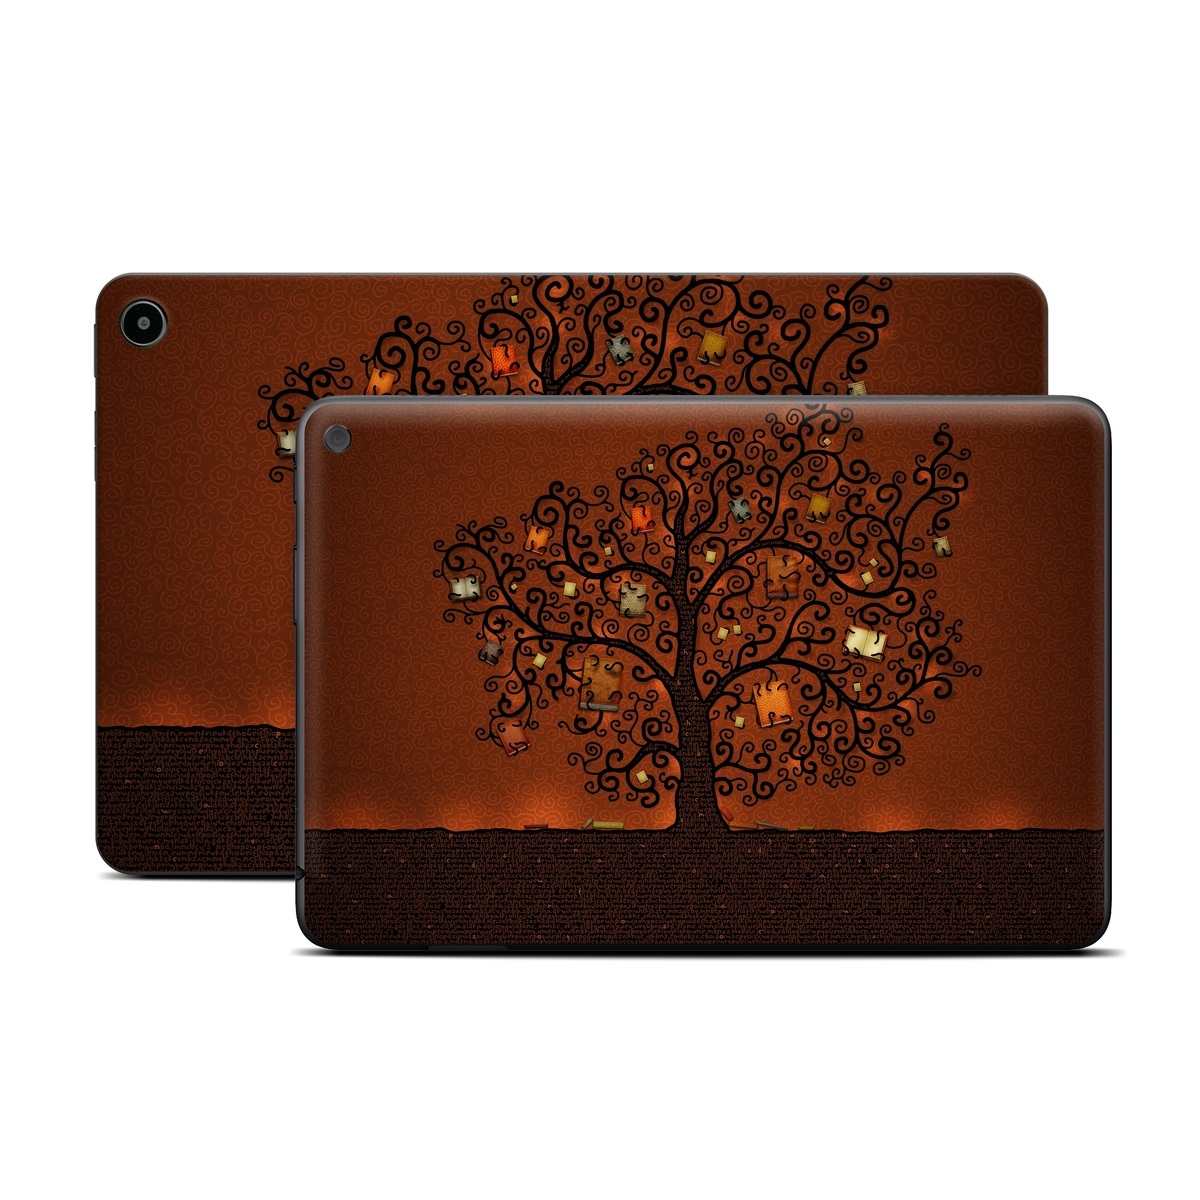 Amazon Fire Tablet Series Skin Skin design of Tree, Brown, Leaf, Plant, Woody plant, Branch, Visual arts, Font, Pattern, Art, with black colors